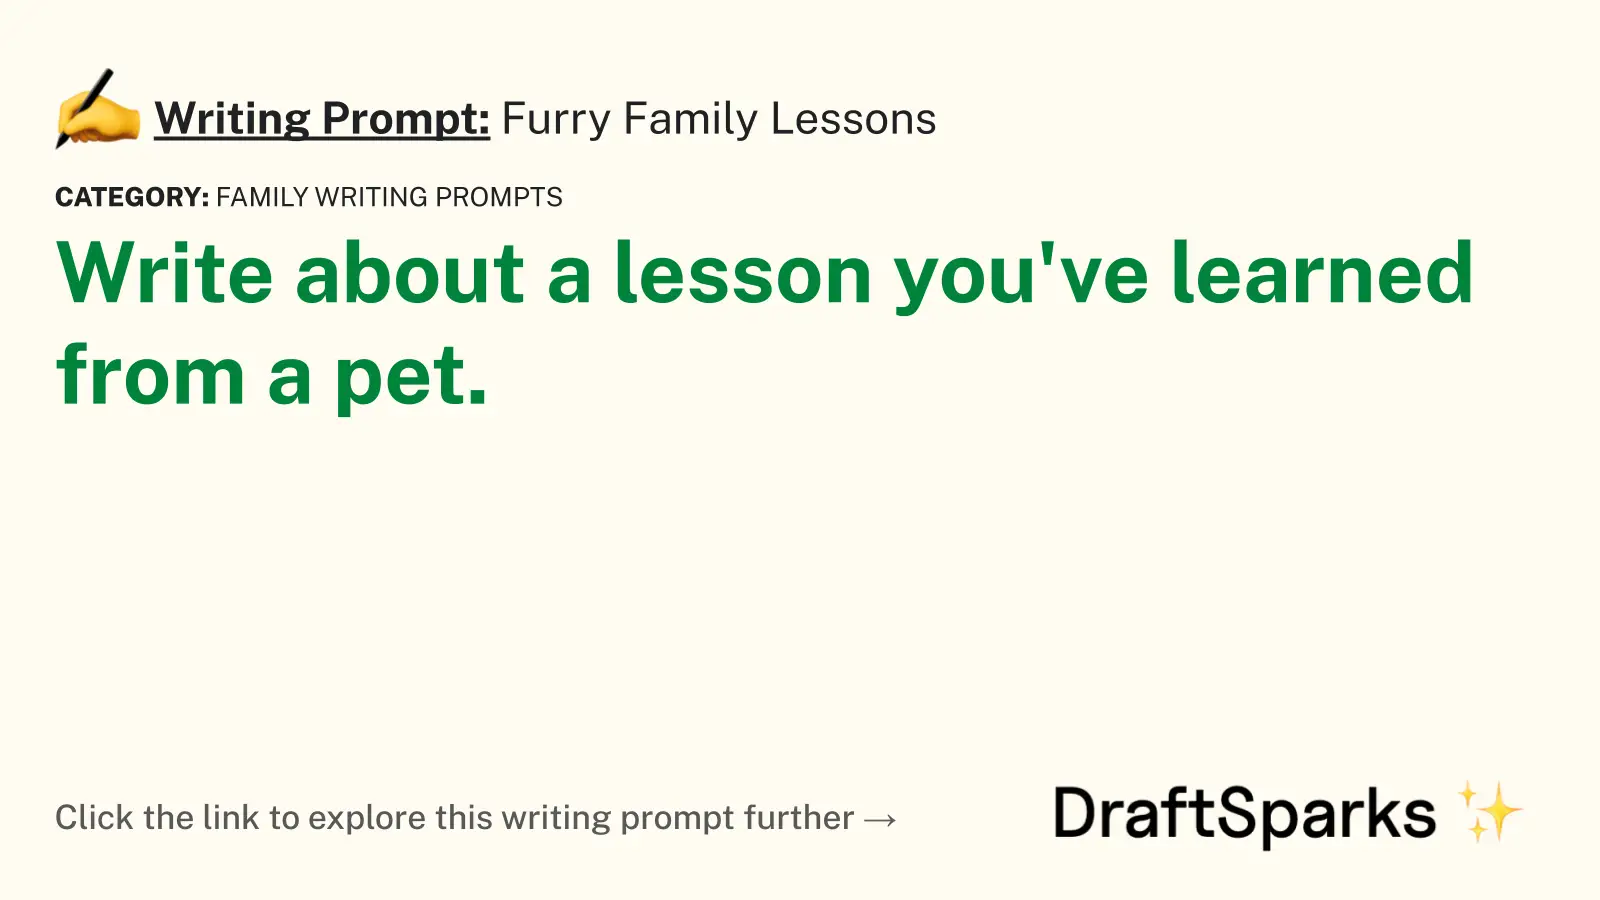 Furry Family Lessons